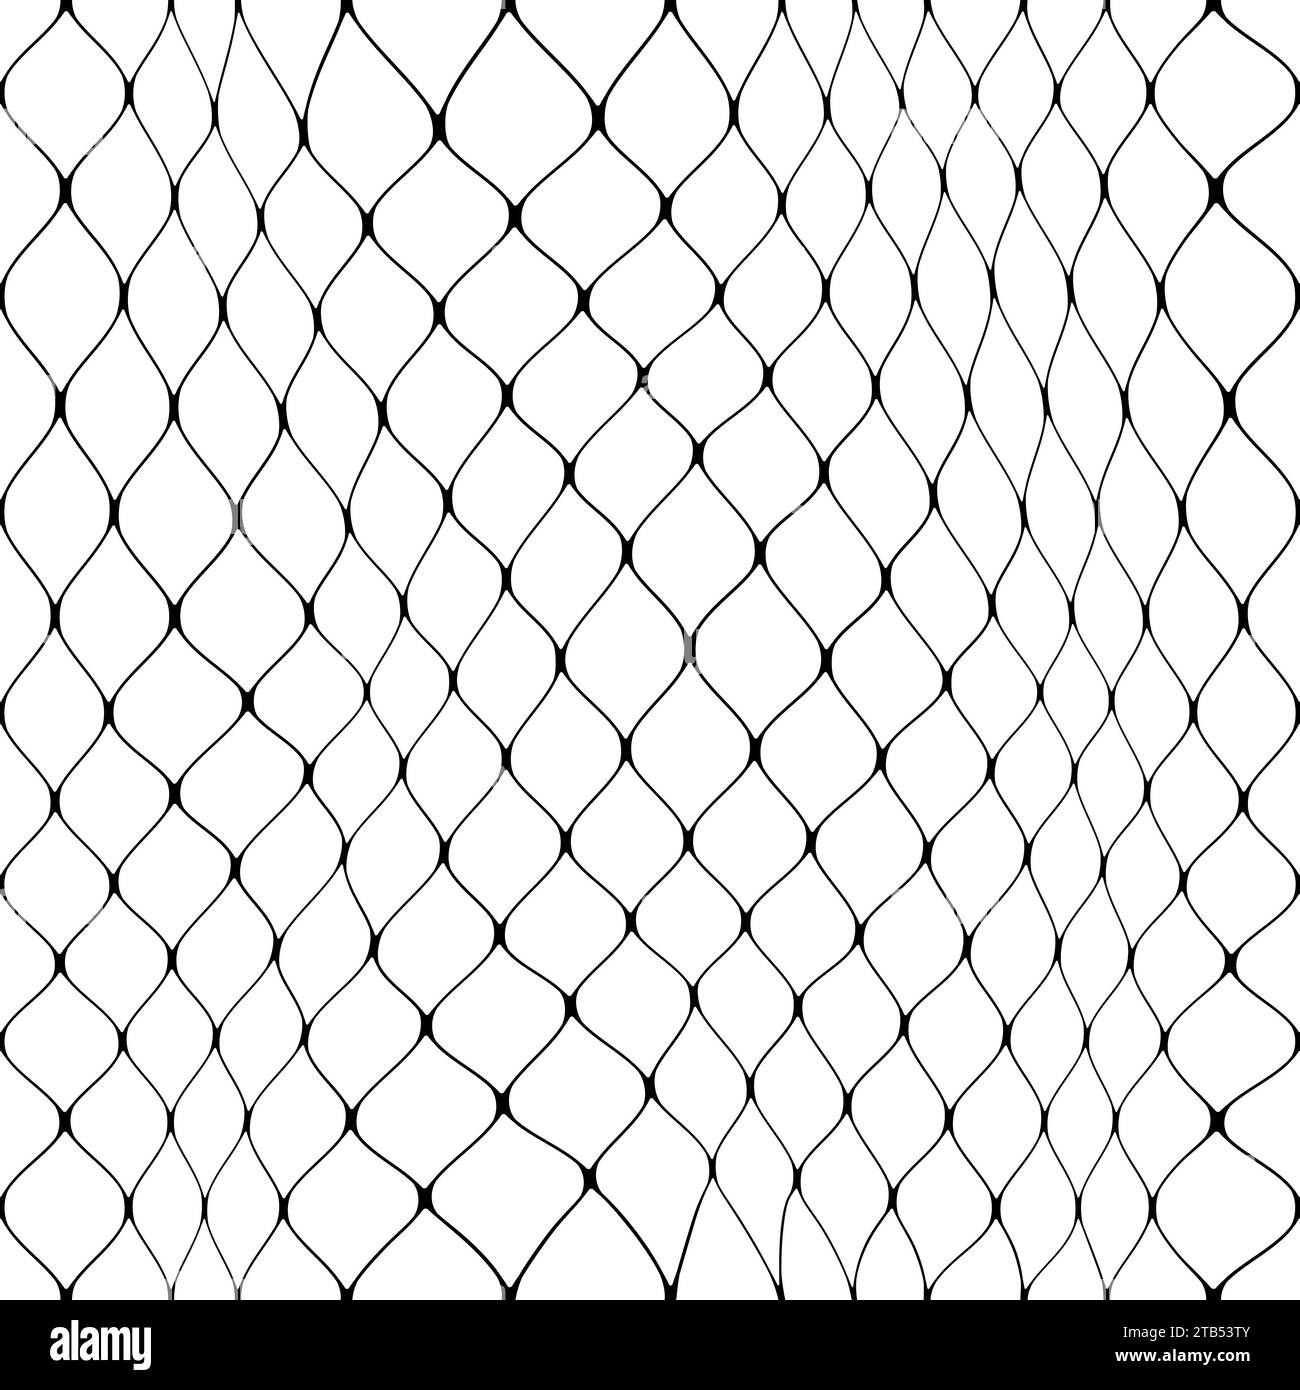 Fish net seamless pattern or fishnet background with mesh grid of fishing  rope, vector wavy lines.